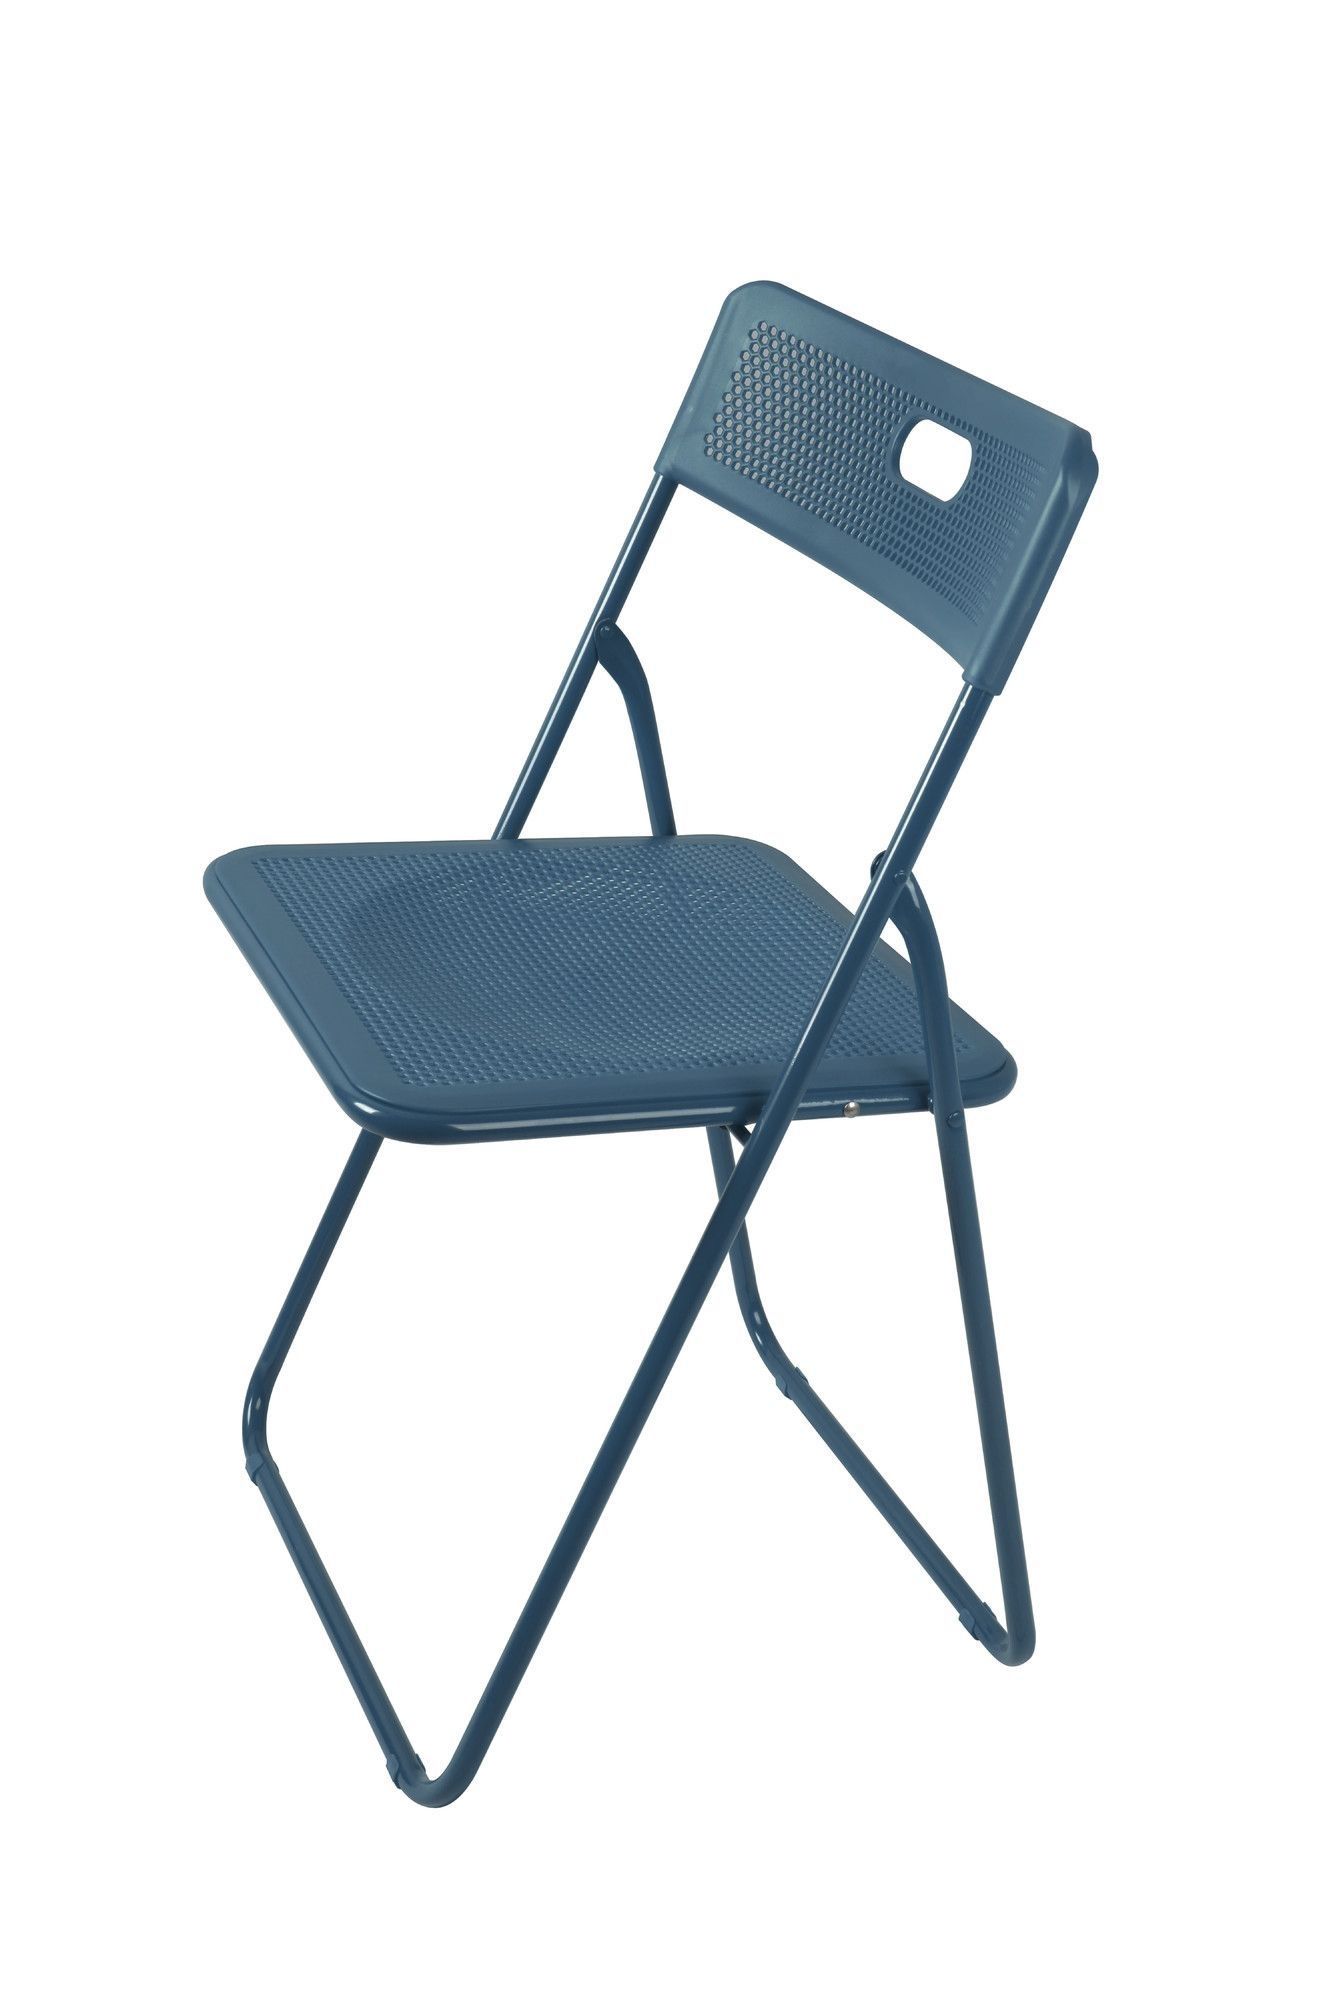 Honeycomb Folding Patio Dining Chair (View 11 of 20)